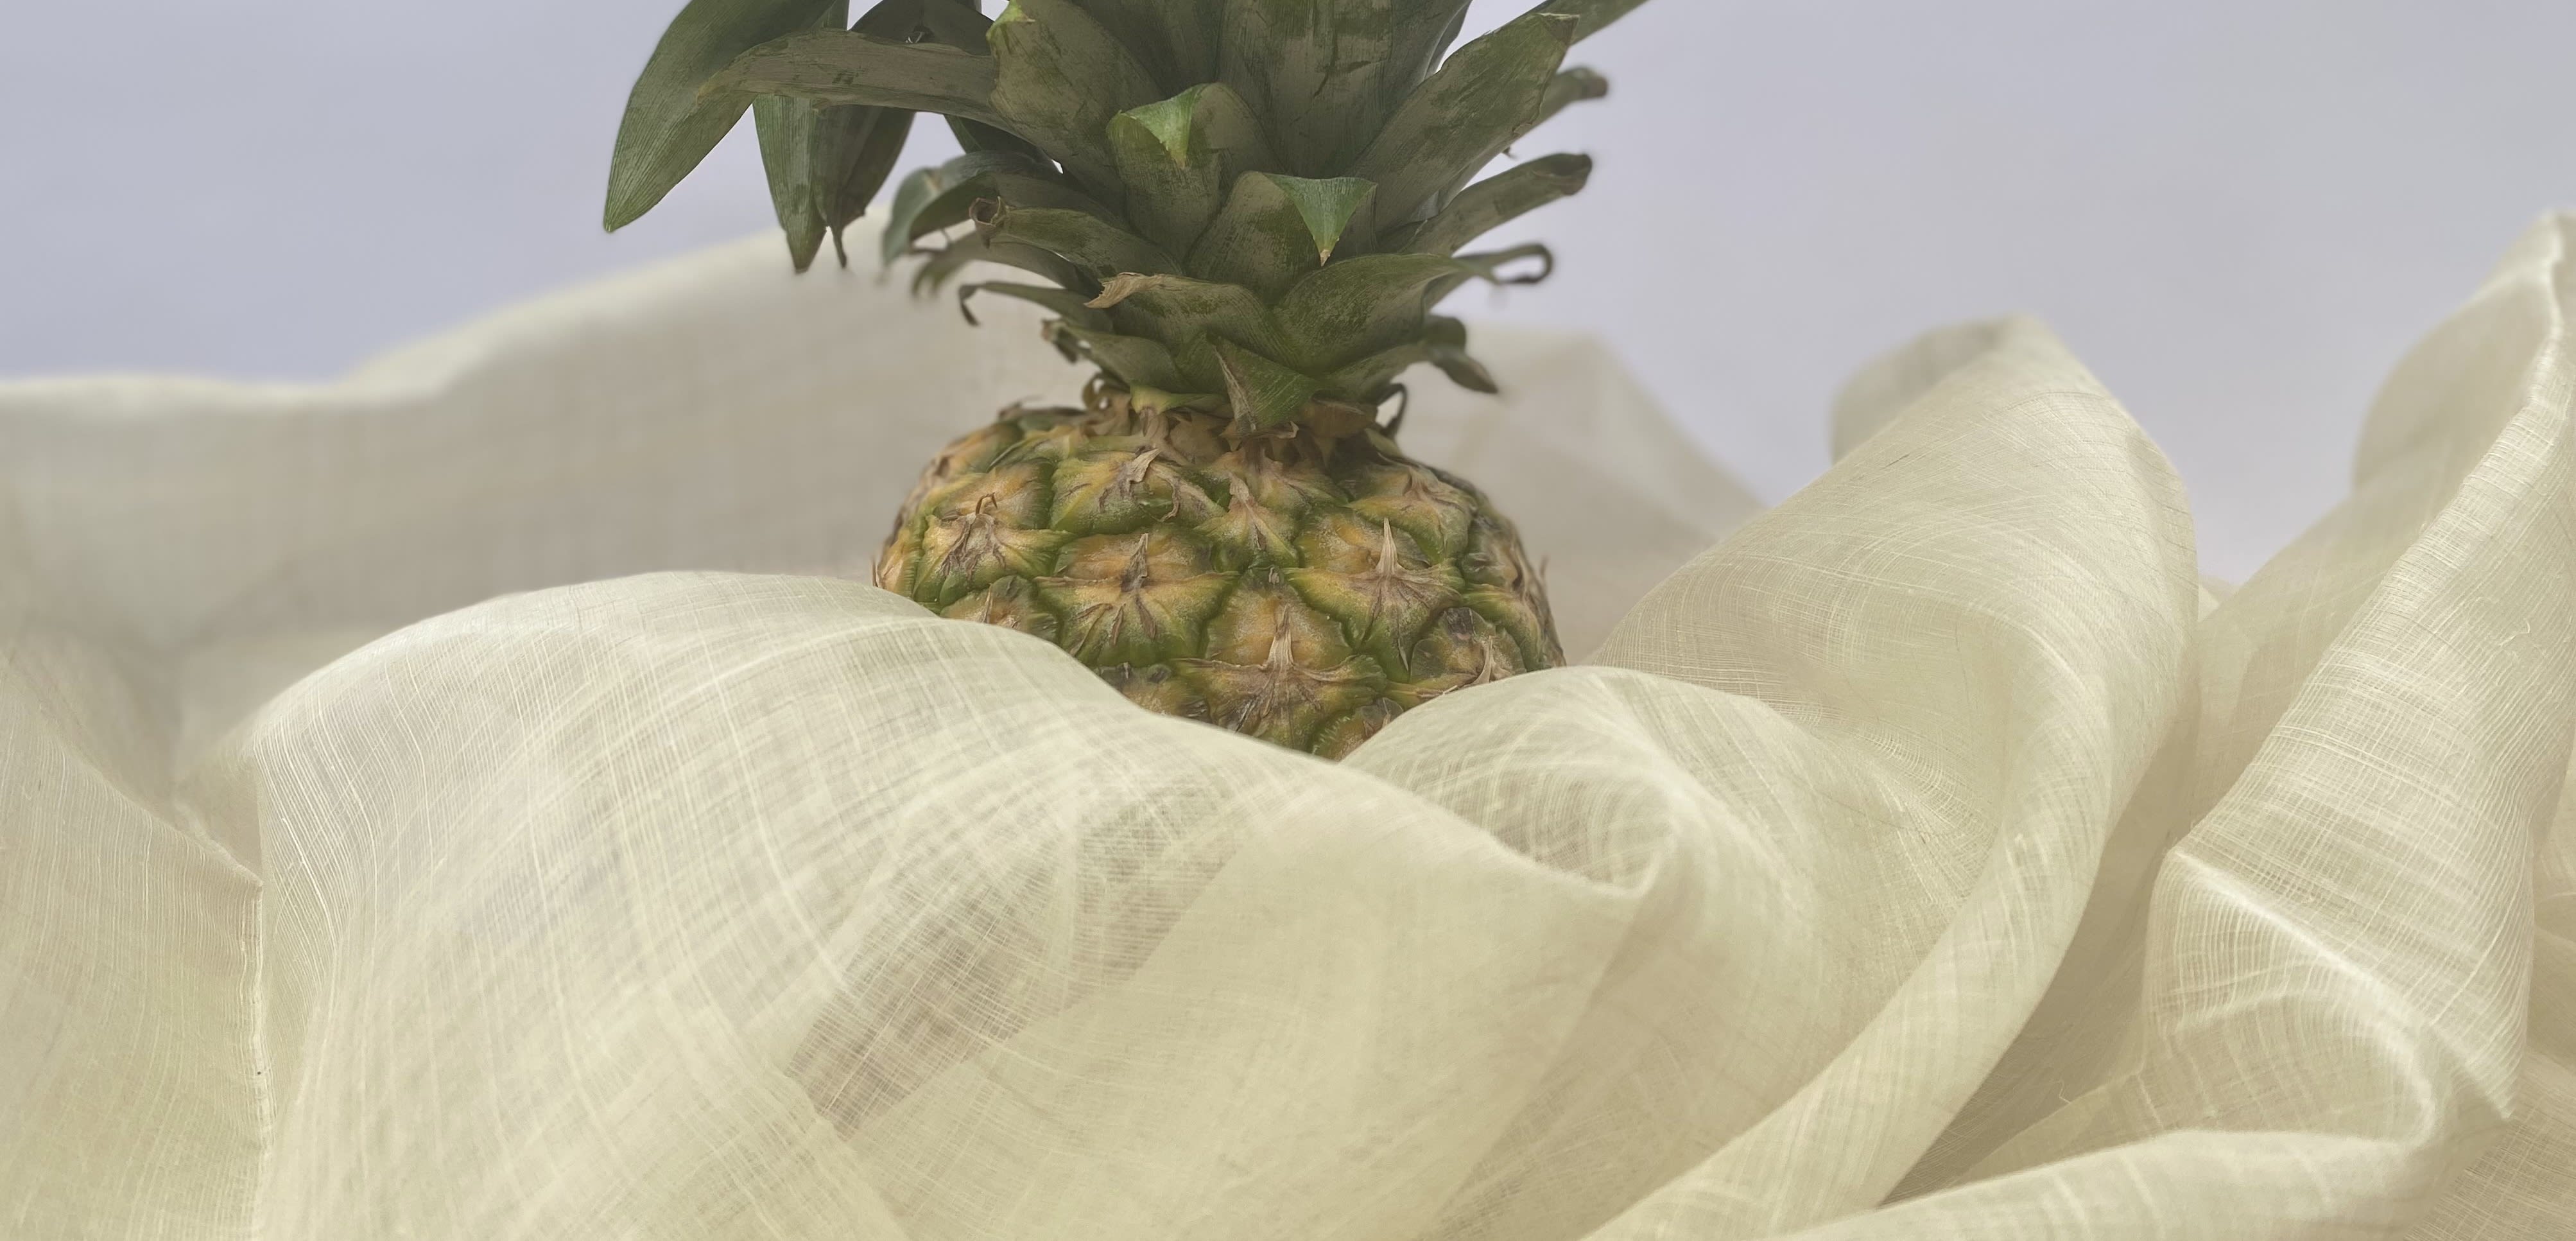 Pineapple woven fabric from waste